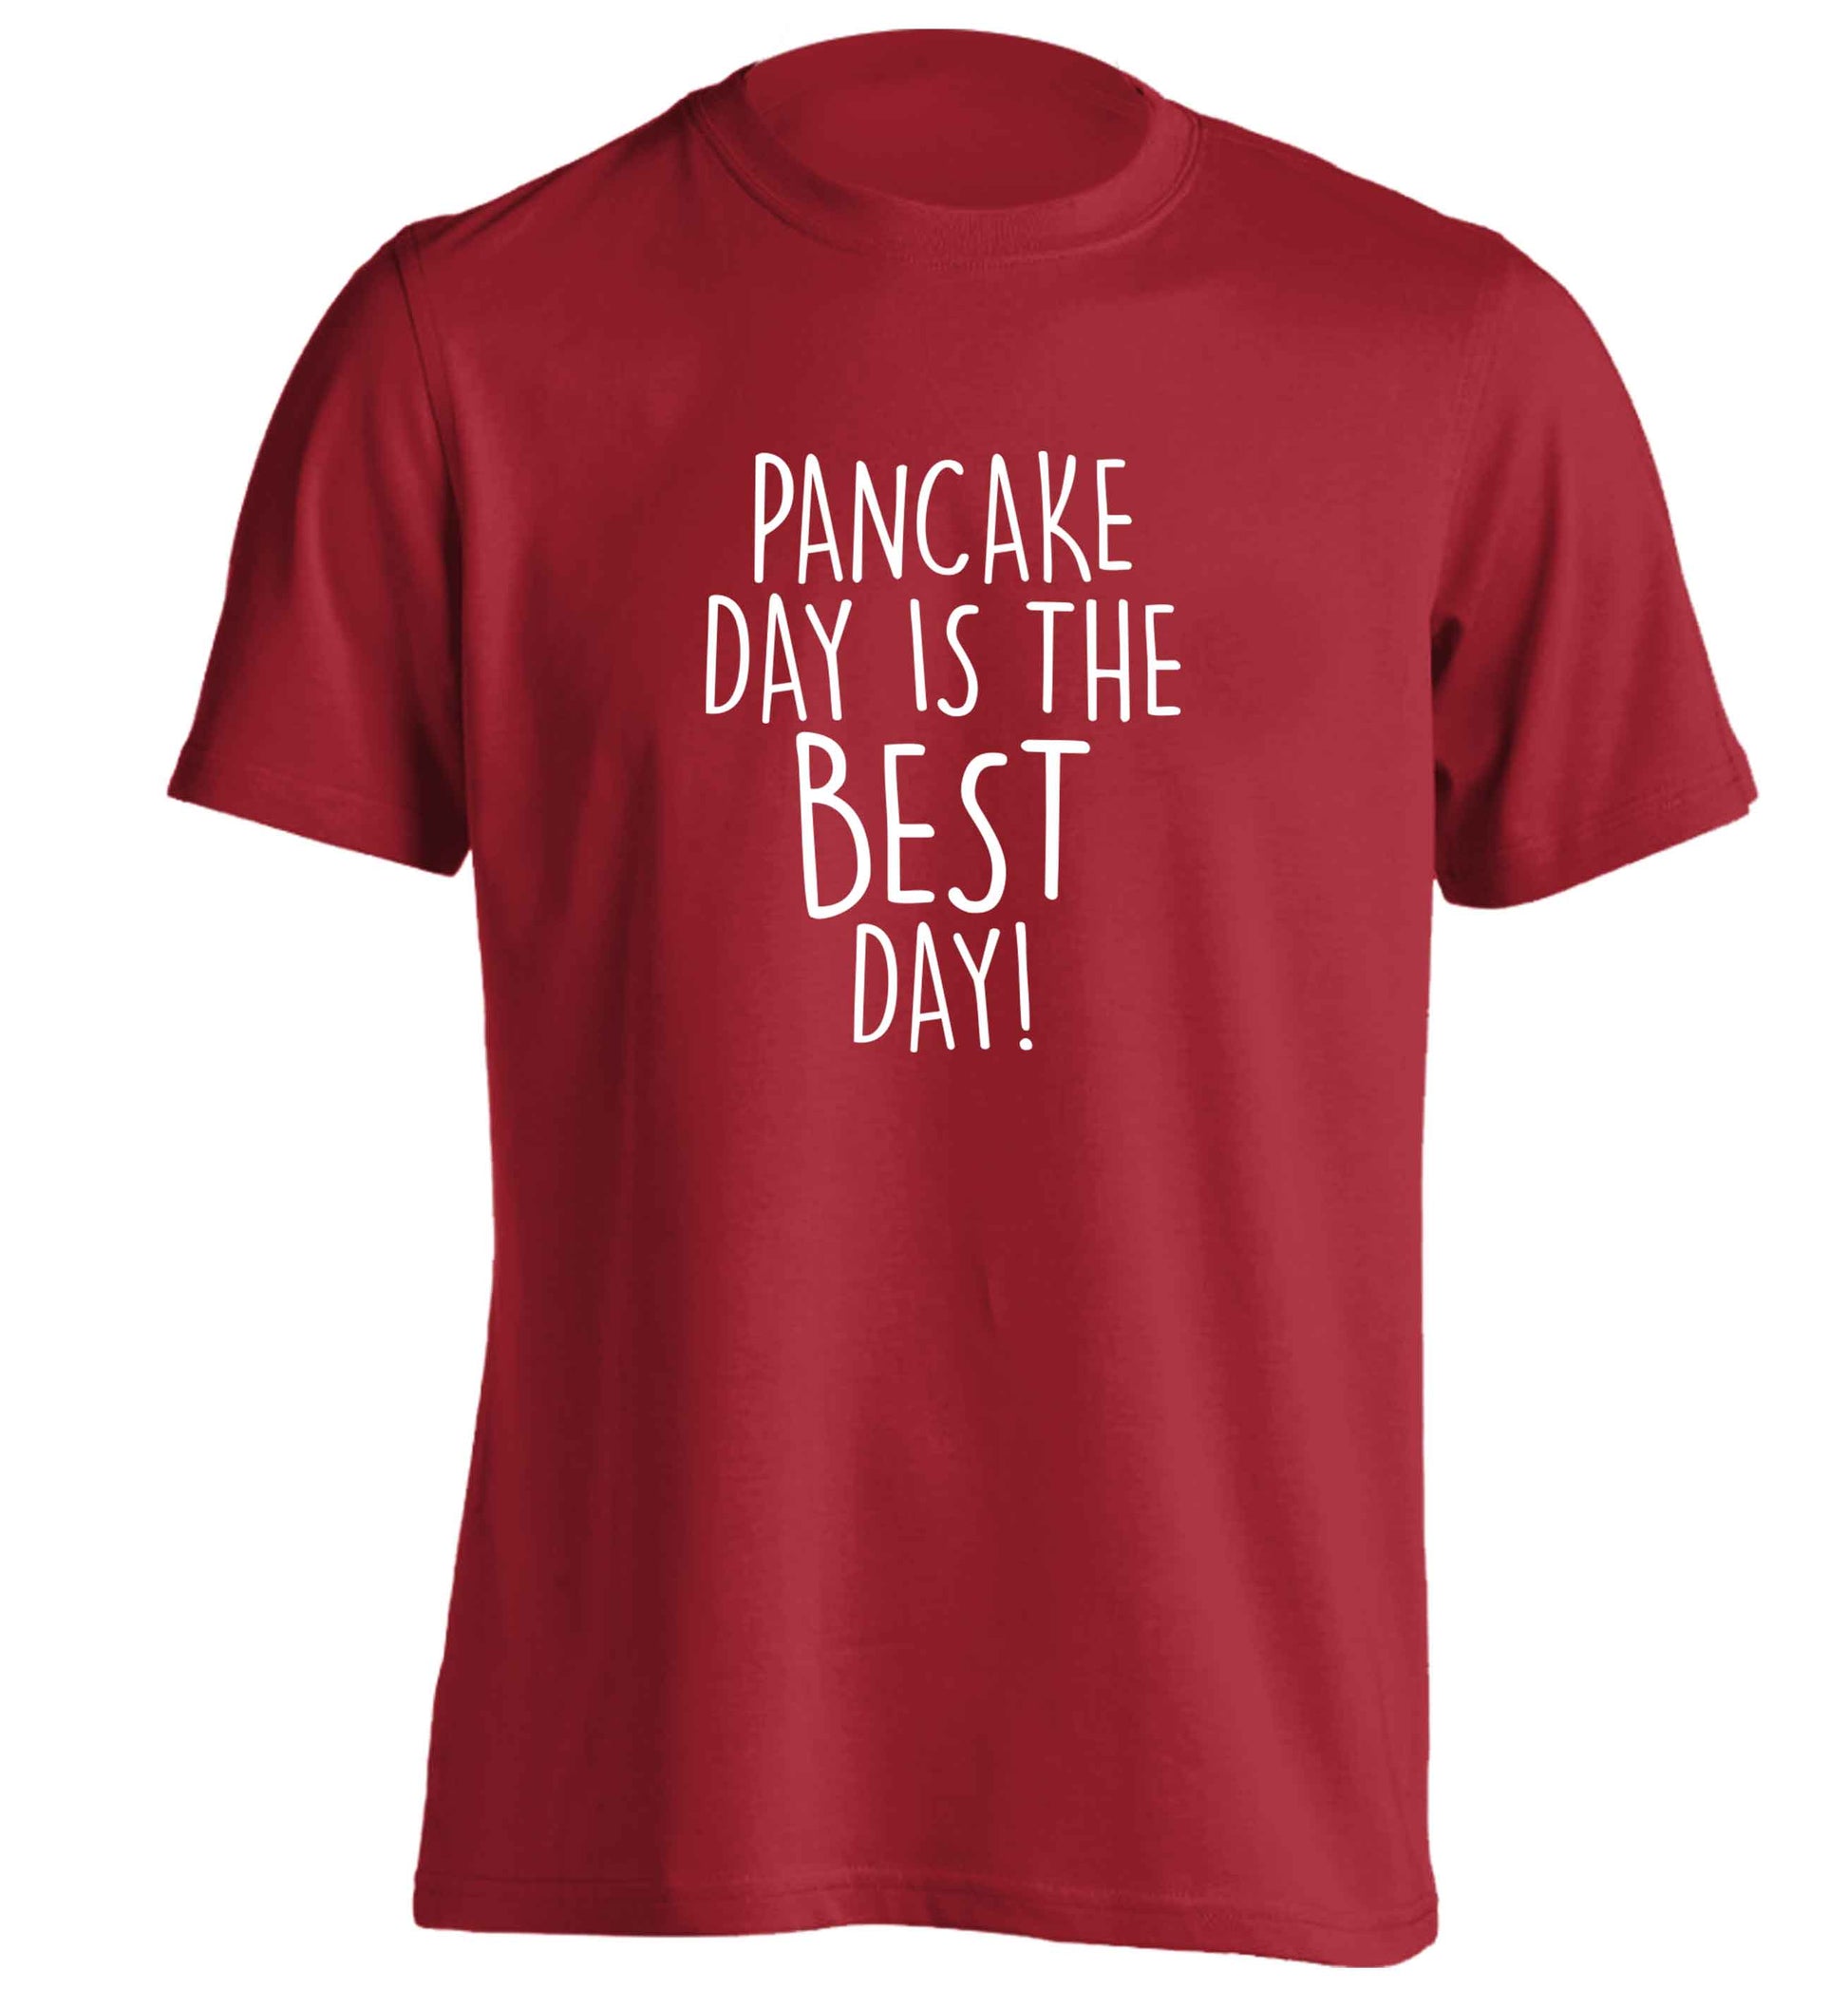 Pancake day is the best day adults unisex red Tshirt 2XL